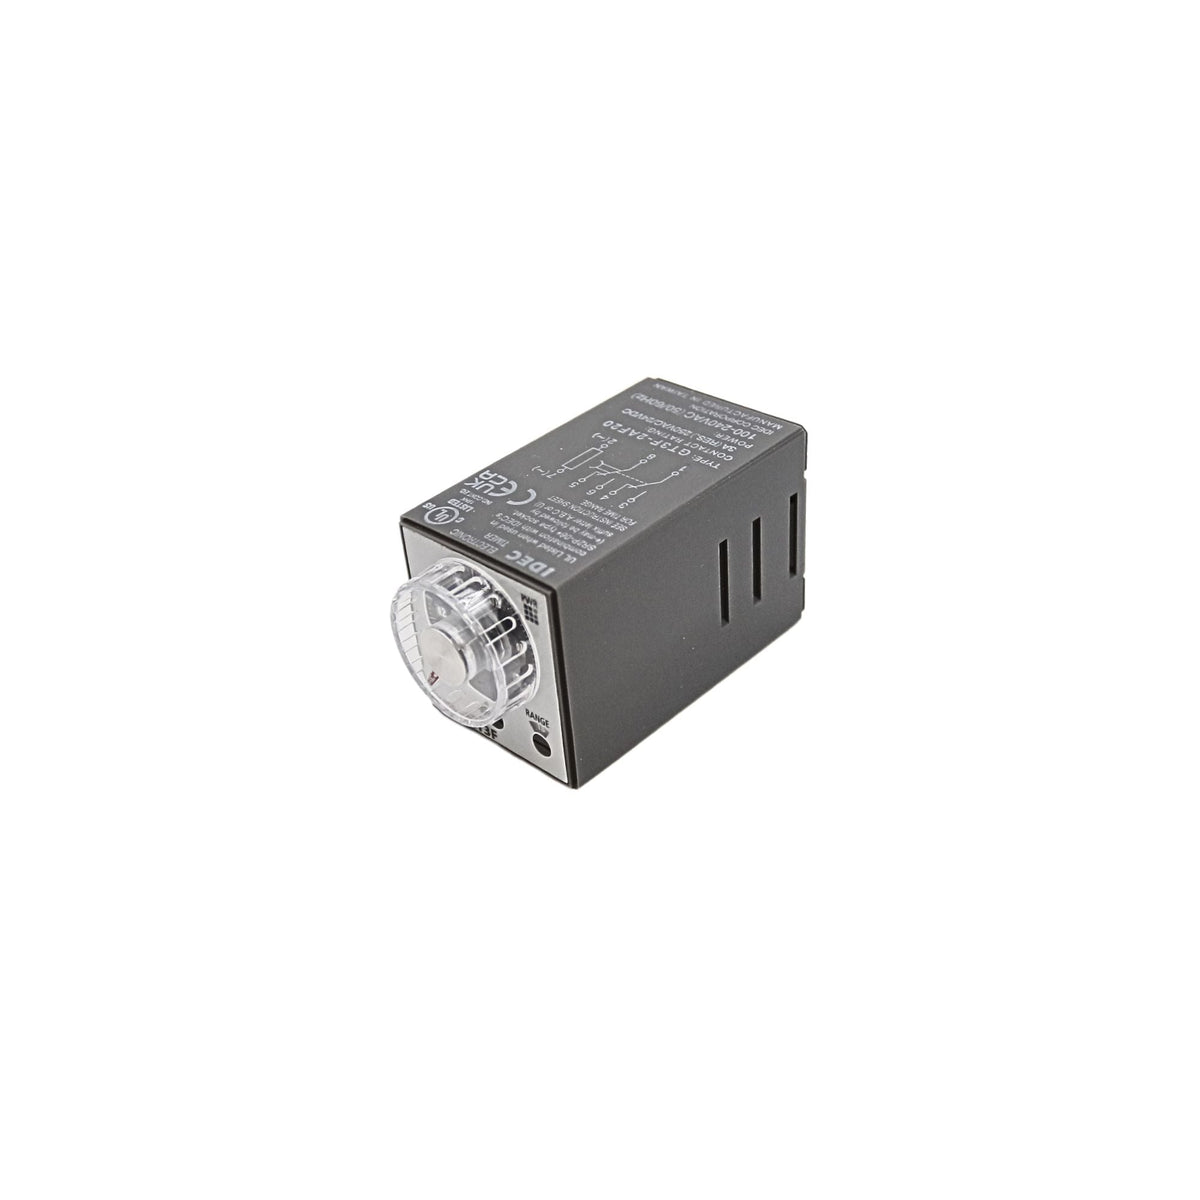 IDEC | 8 PIN DPDT TRUE POWER OFF DELAY TIM | GT3F-2AF20 used on Idec product line - side view